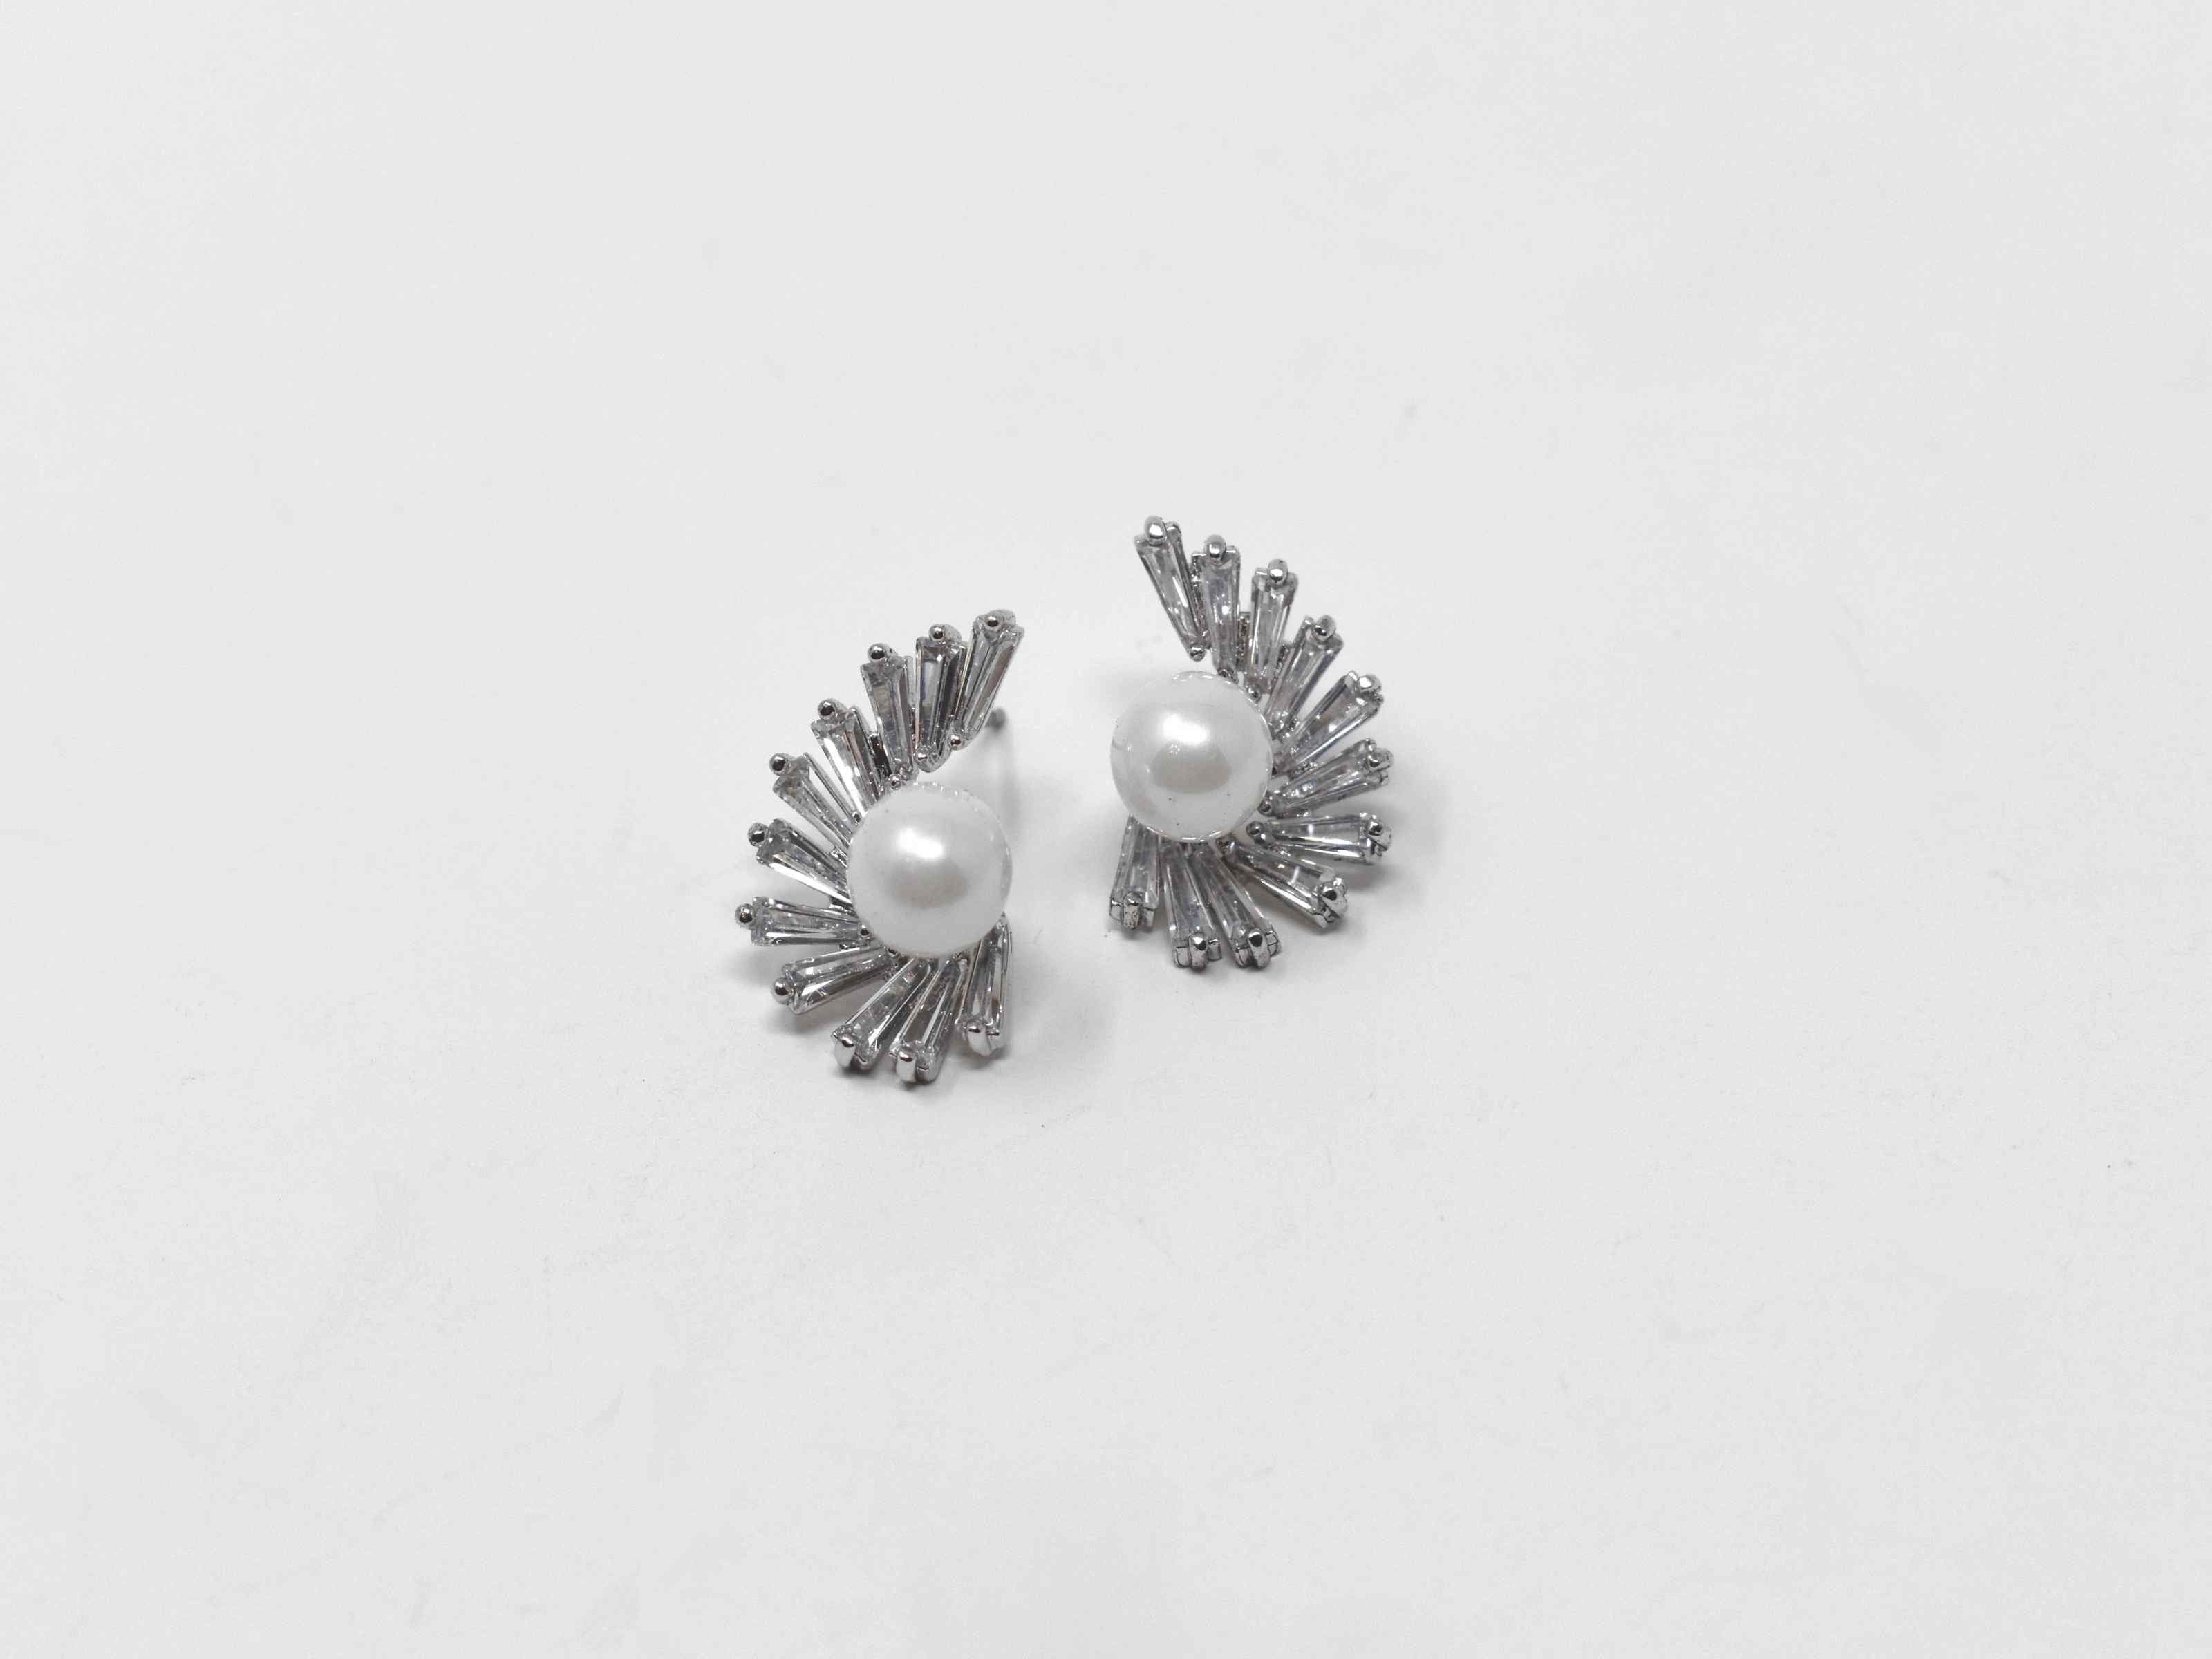 Our bouvardia earrings are a beautiful classic with a modern twist. These knob earrings have a pearl core adorned with cascading stones. They are 3/4 of an inch in length with a push back clasp.